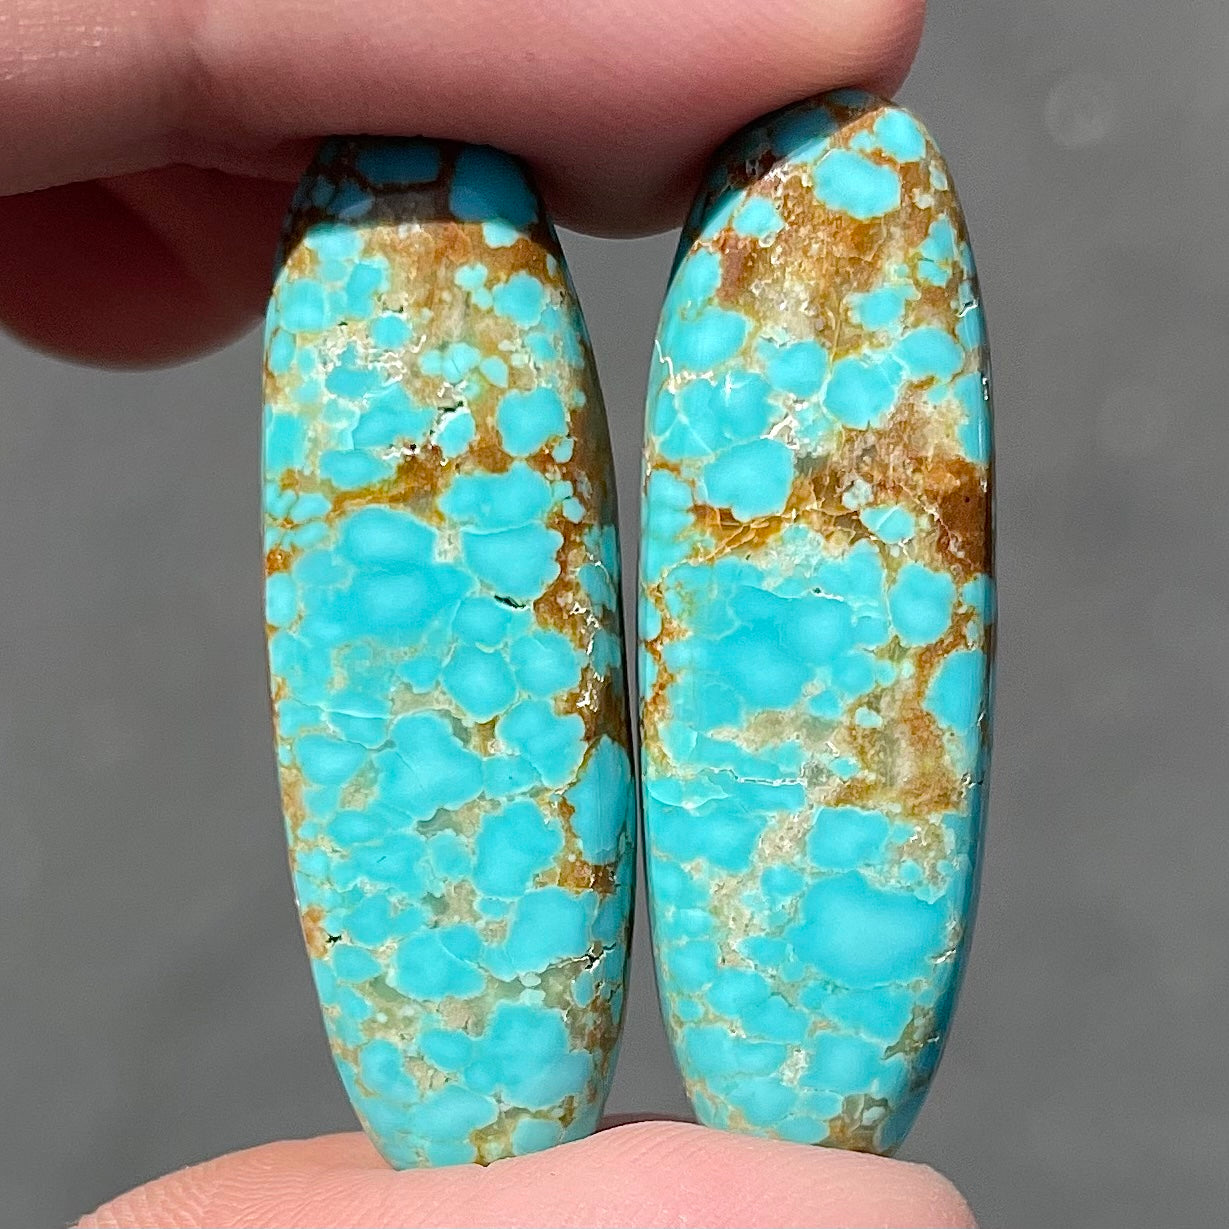 A pair of loose oval cabochon cut turquoise stones from Number 8 Mine, Nevada.